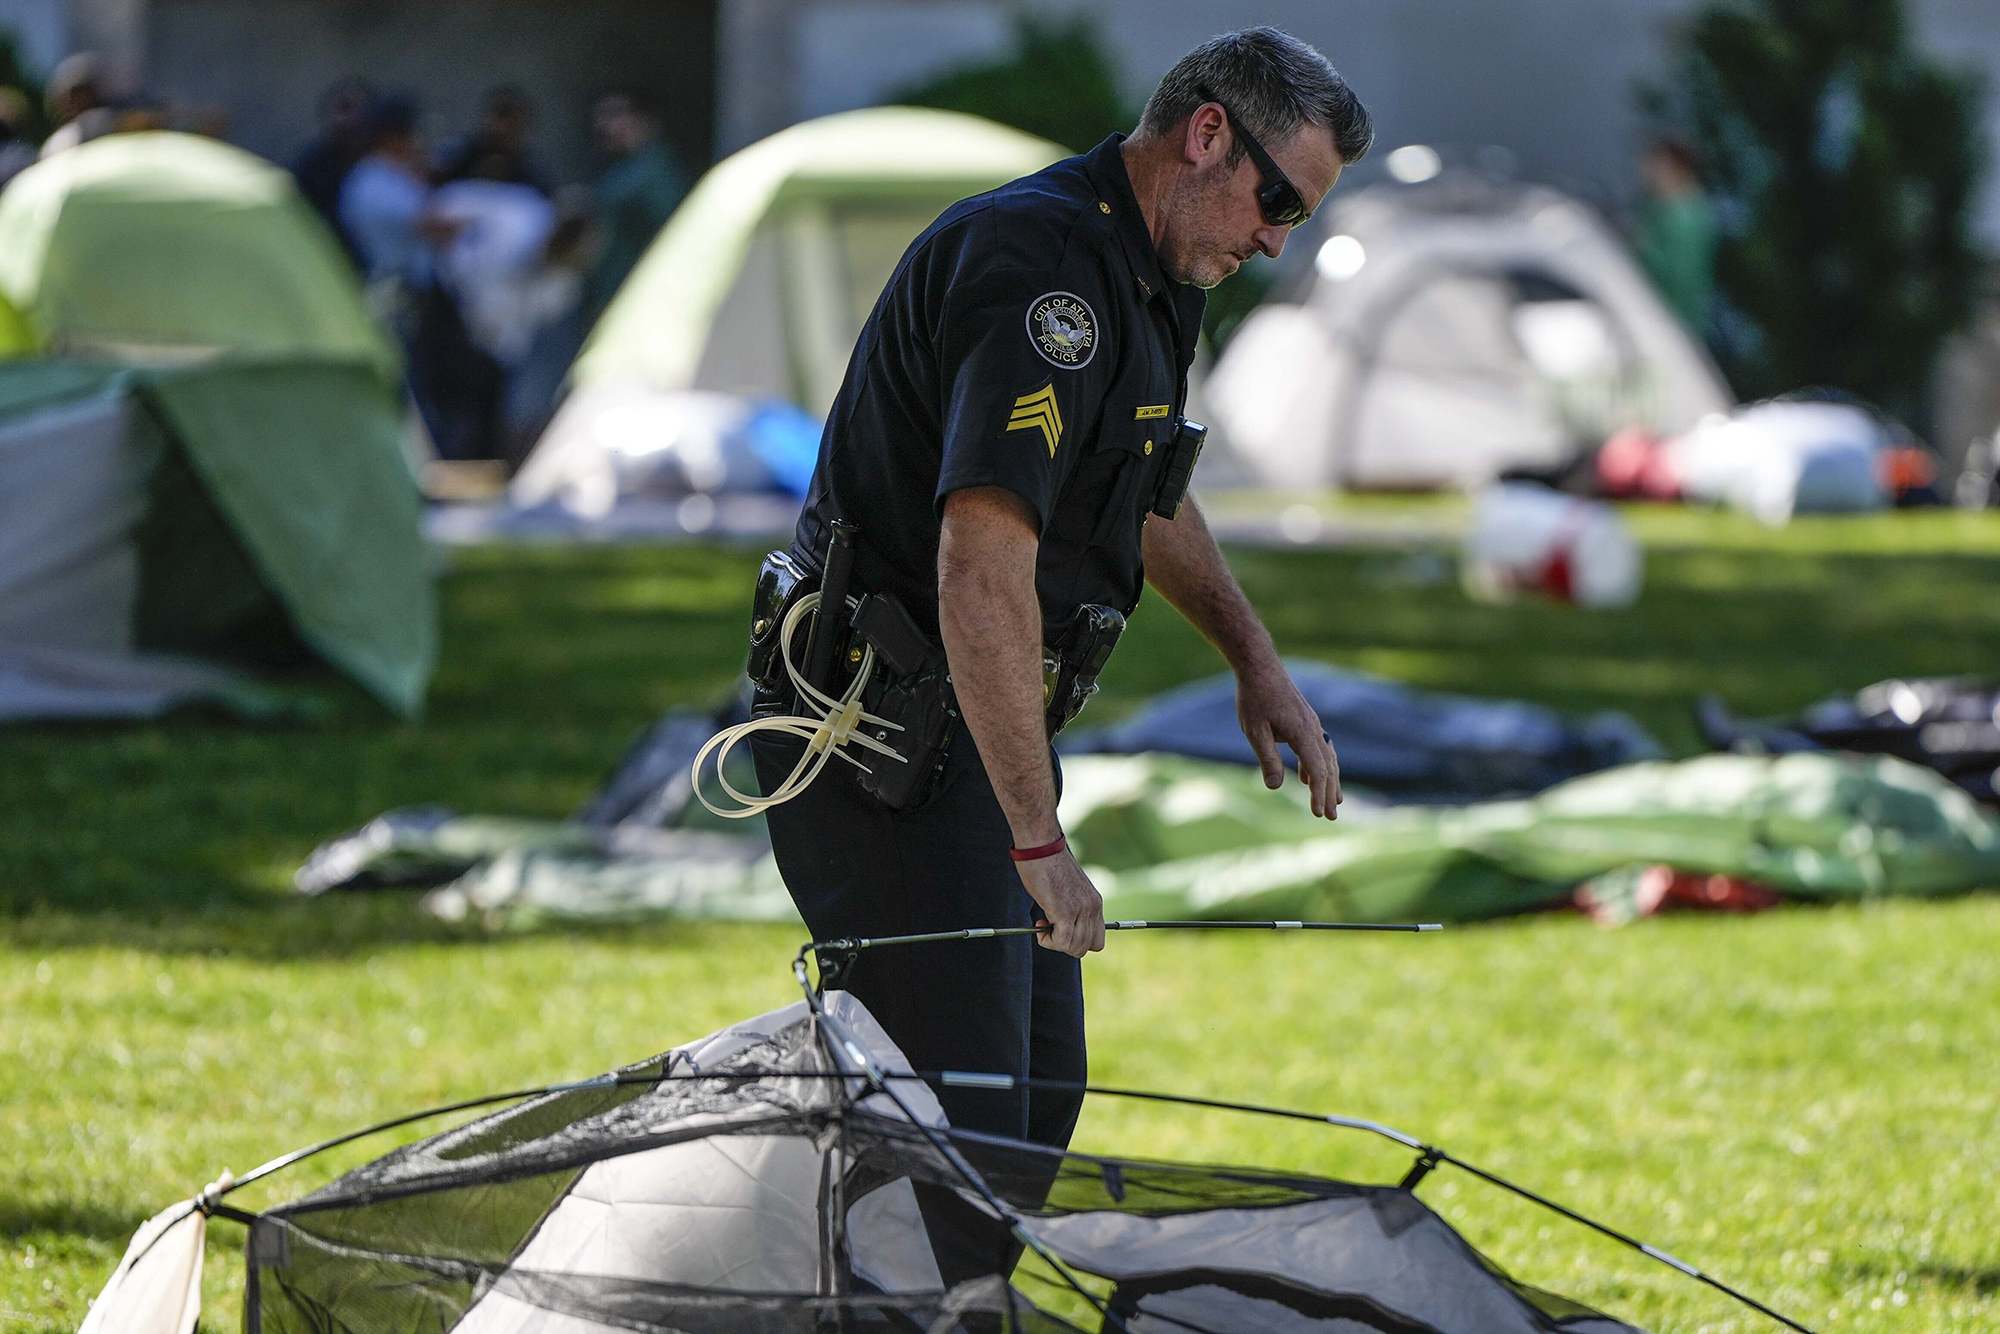 An Atlanta police officer takes down tents on the campus of Emory University after a pro-Palestinian demonstration today.